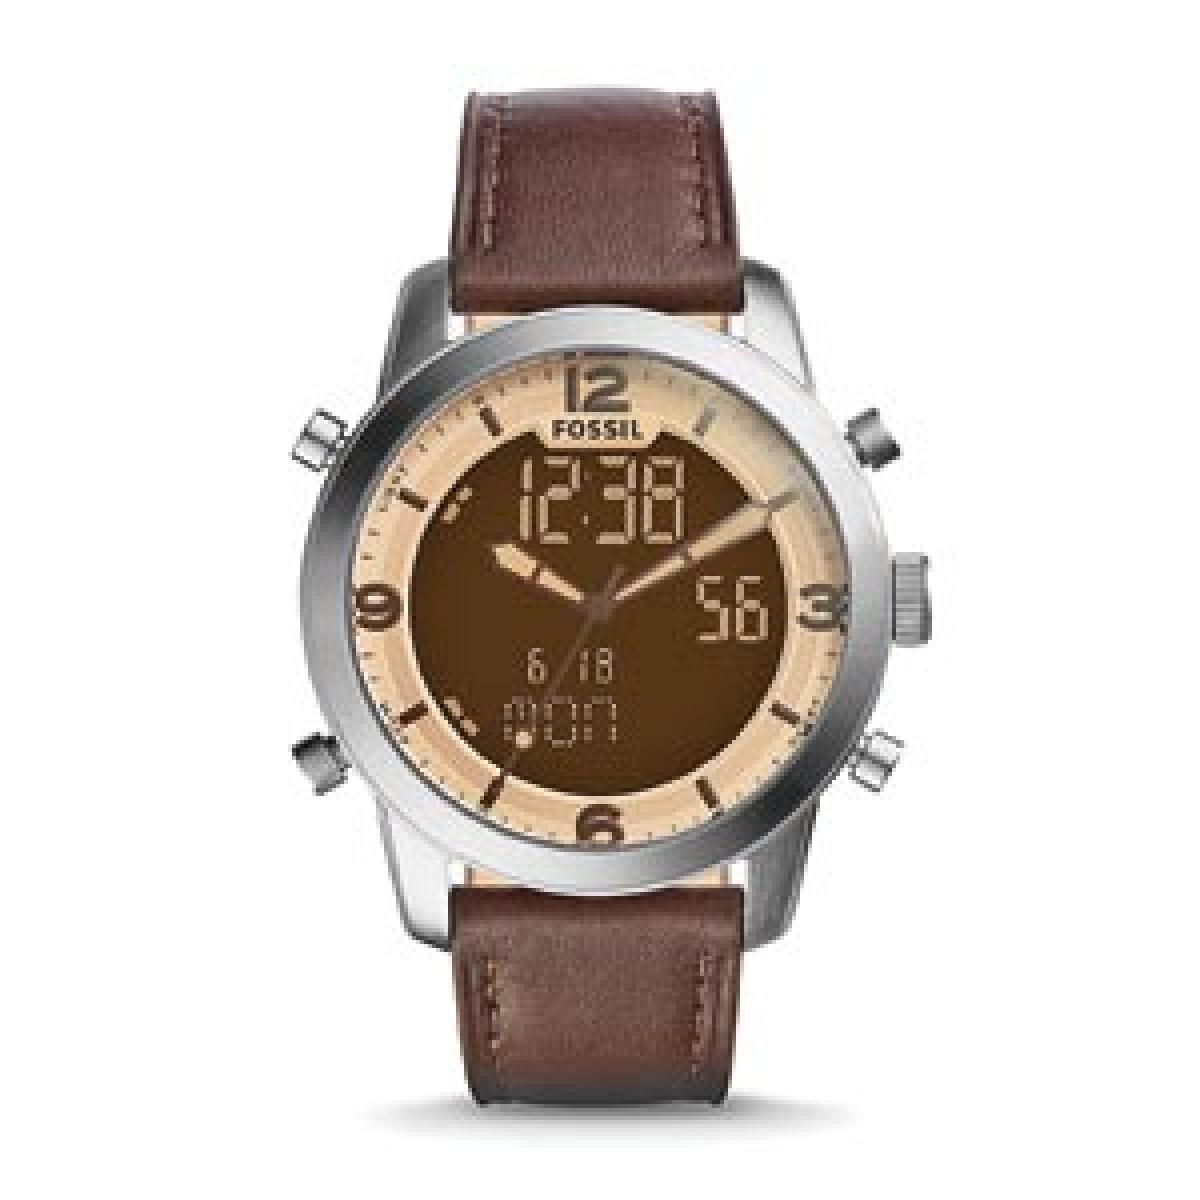 Fossil’s Trench timepieces